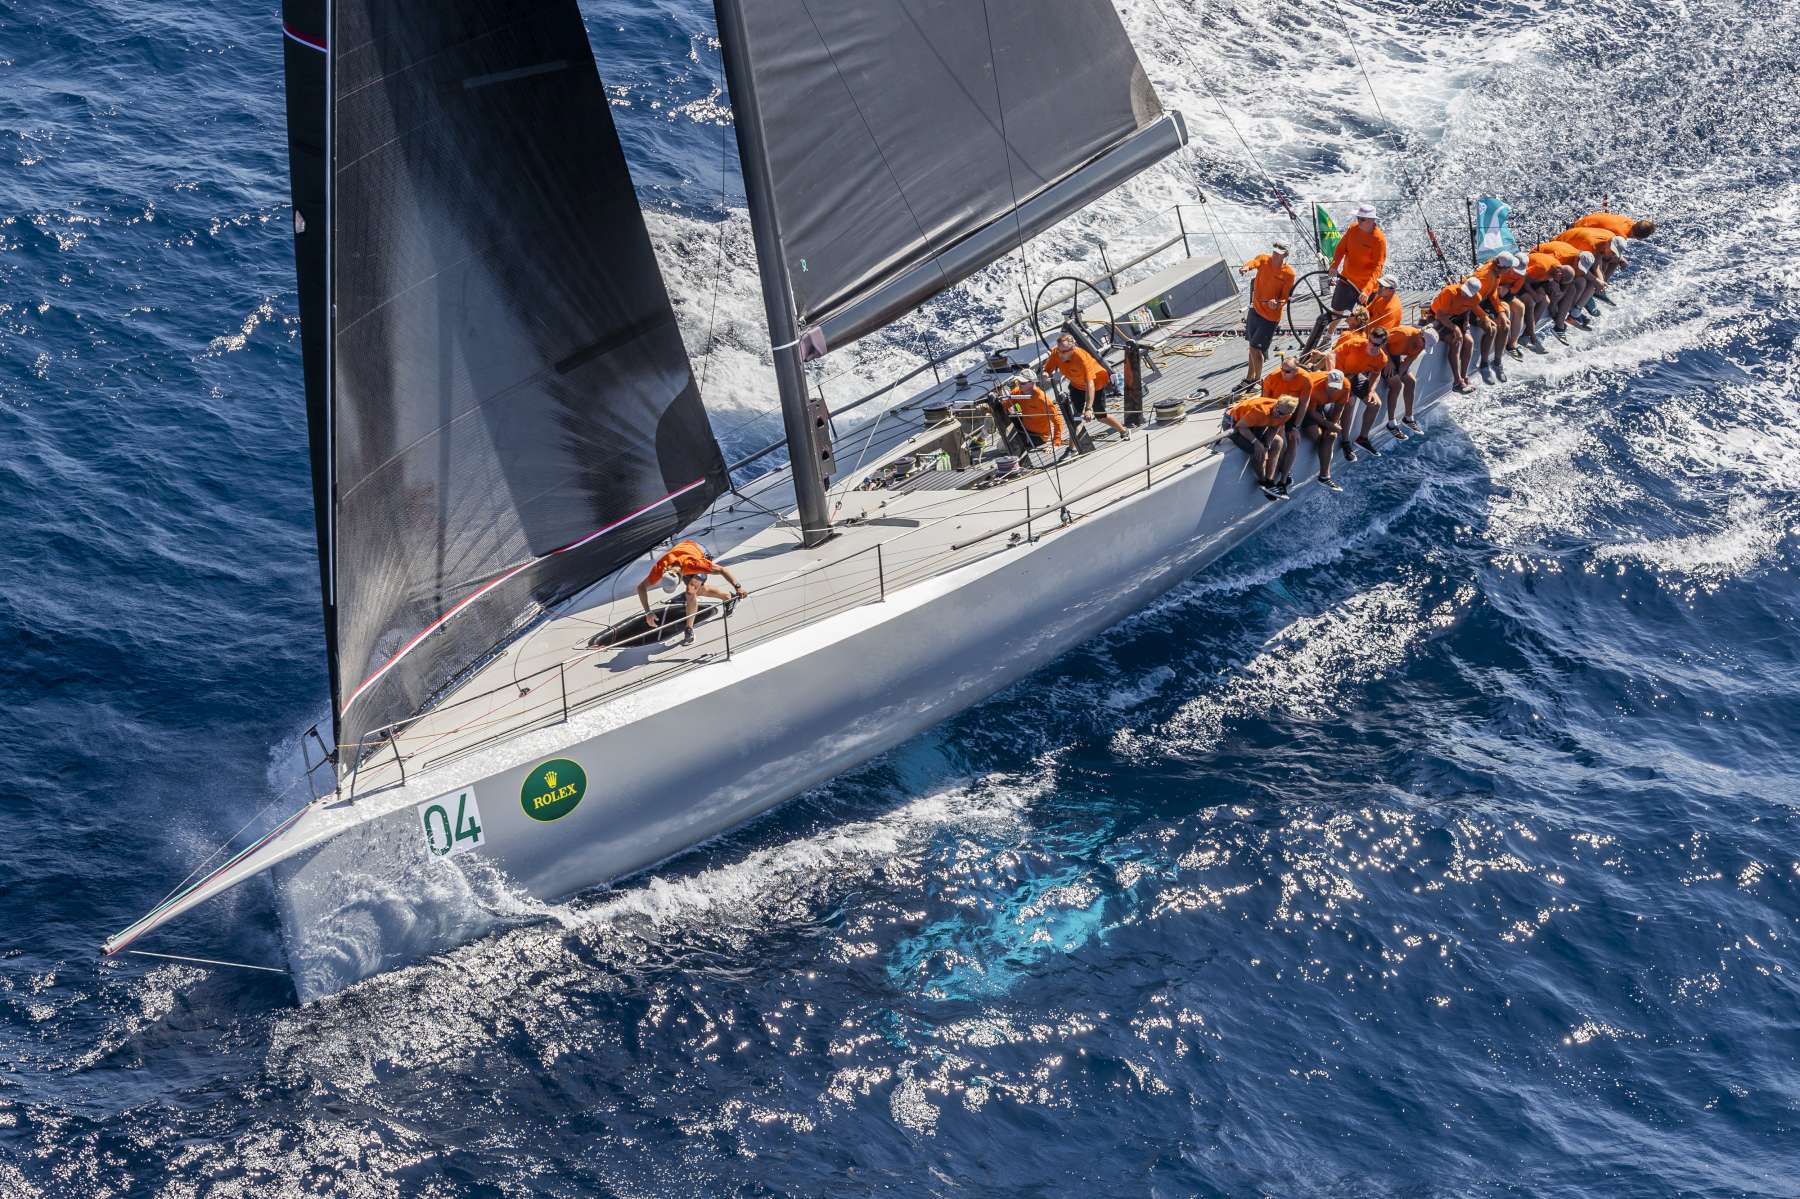 maxi yacht rolex cup